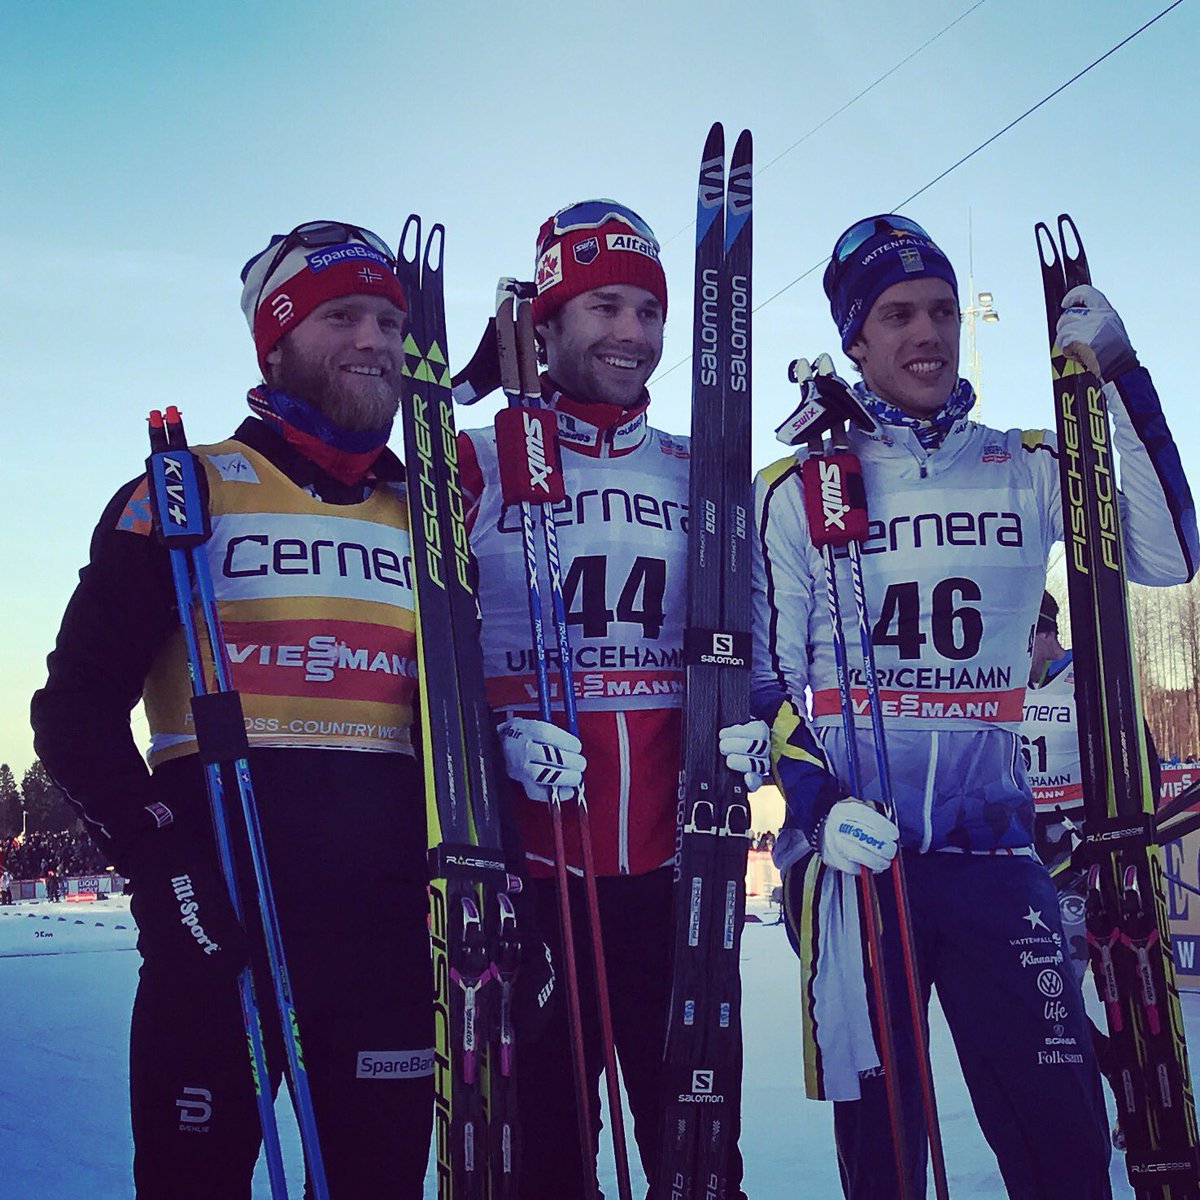 The men's 15 k freestyle podium at Saturday's World Cup in Ulricehamn, Sweden, with Canadian winner Alex Harvey (c), Norwegian runner-up Martin Johnsrud Sundby (l), and Sweden's Marcus Hellner (r) in third. (Photo: FIS Cross Country/Twitter)